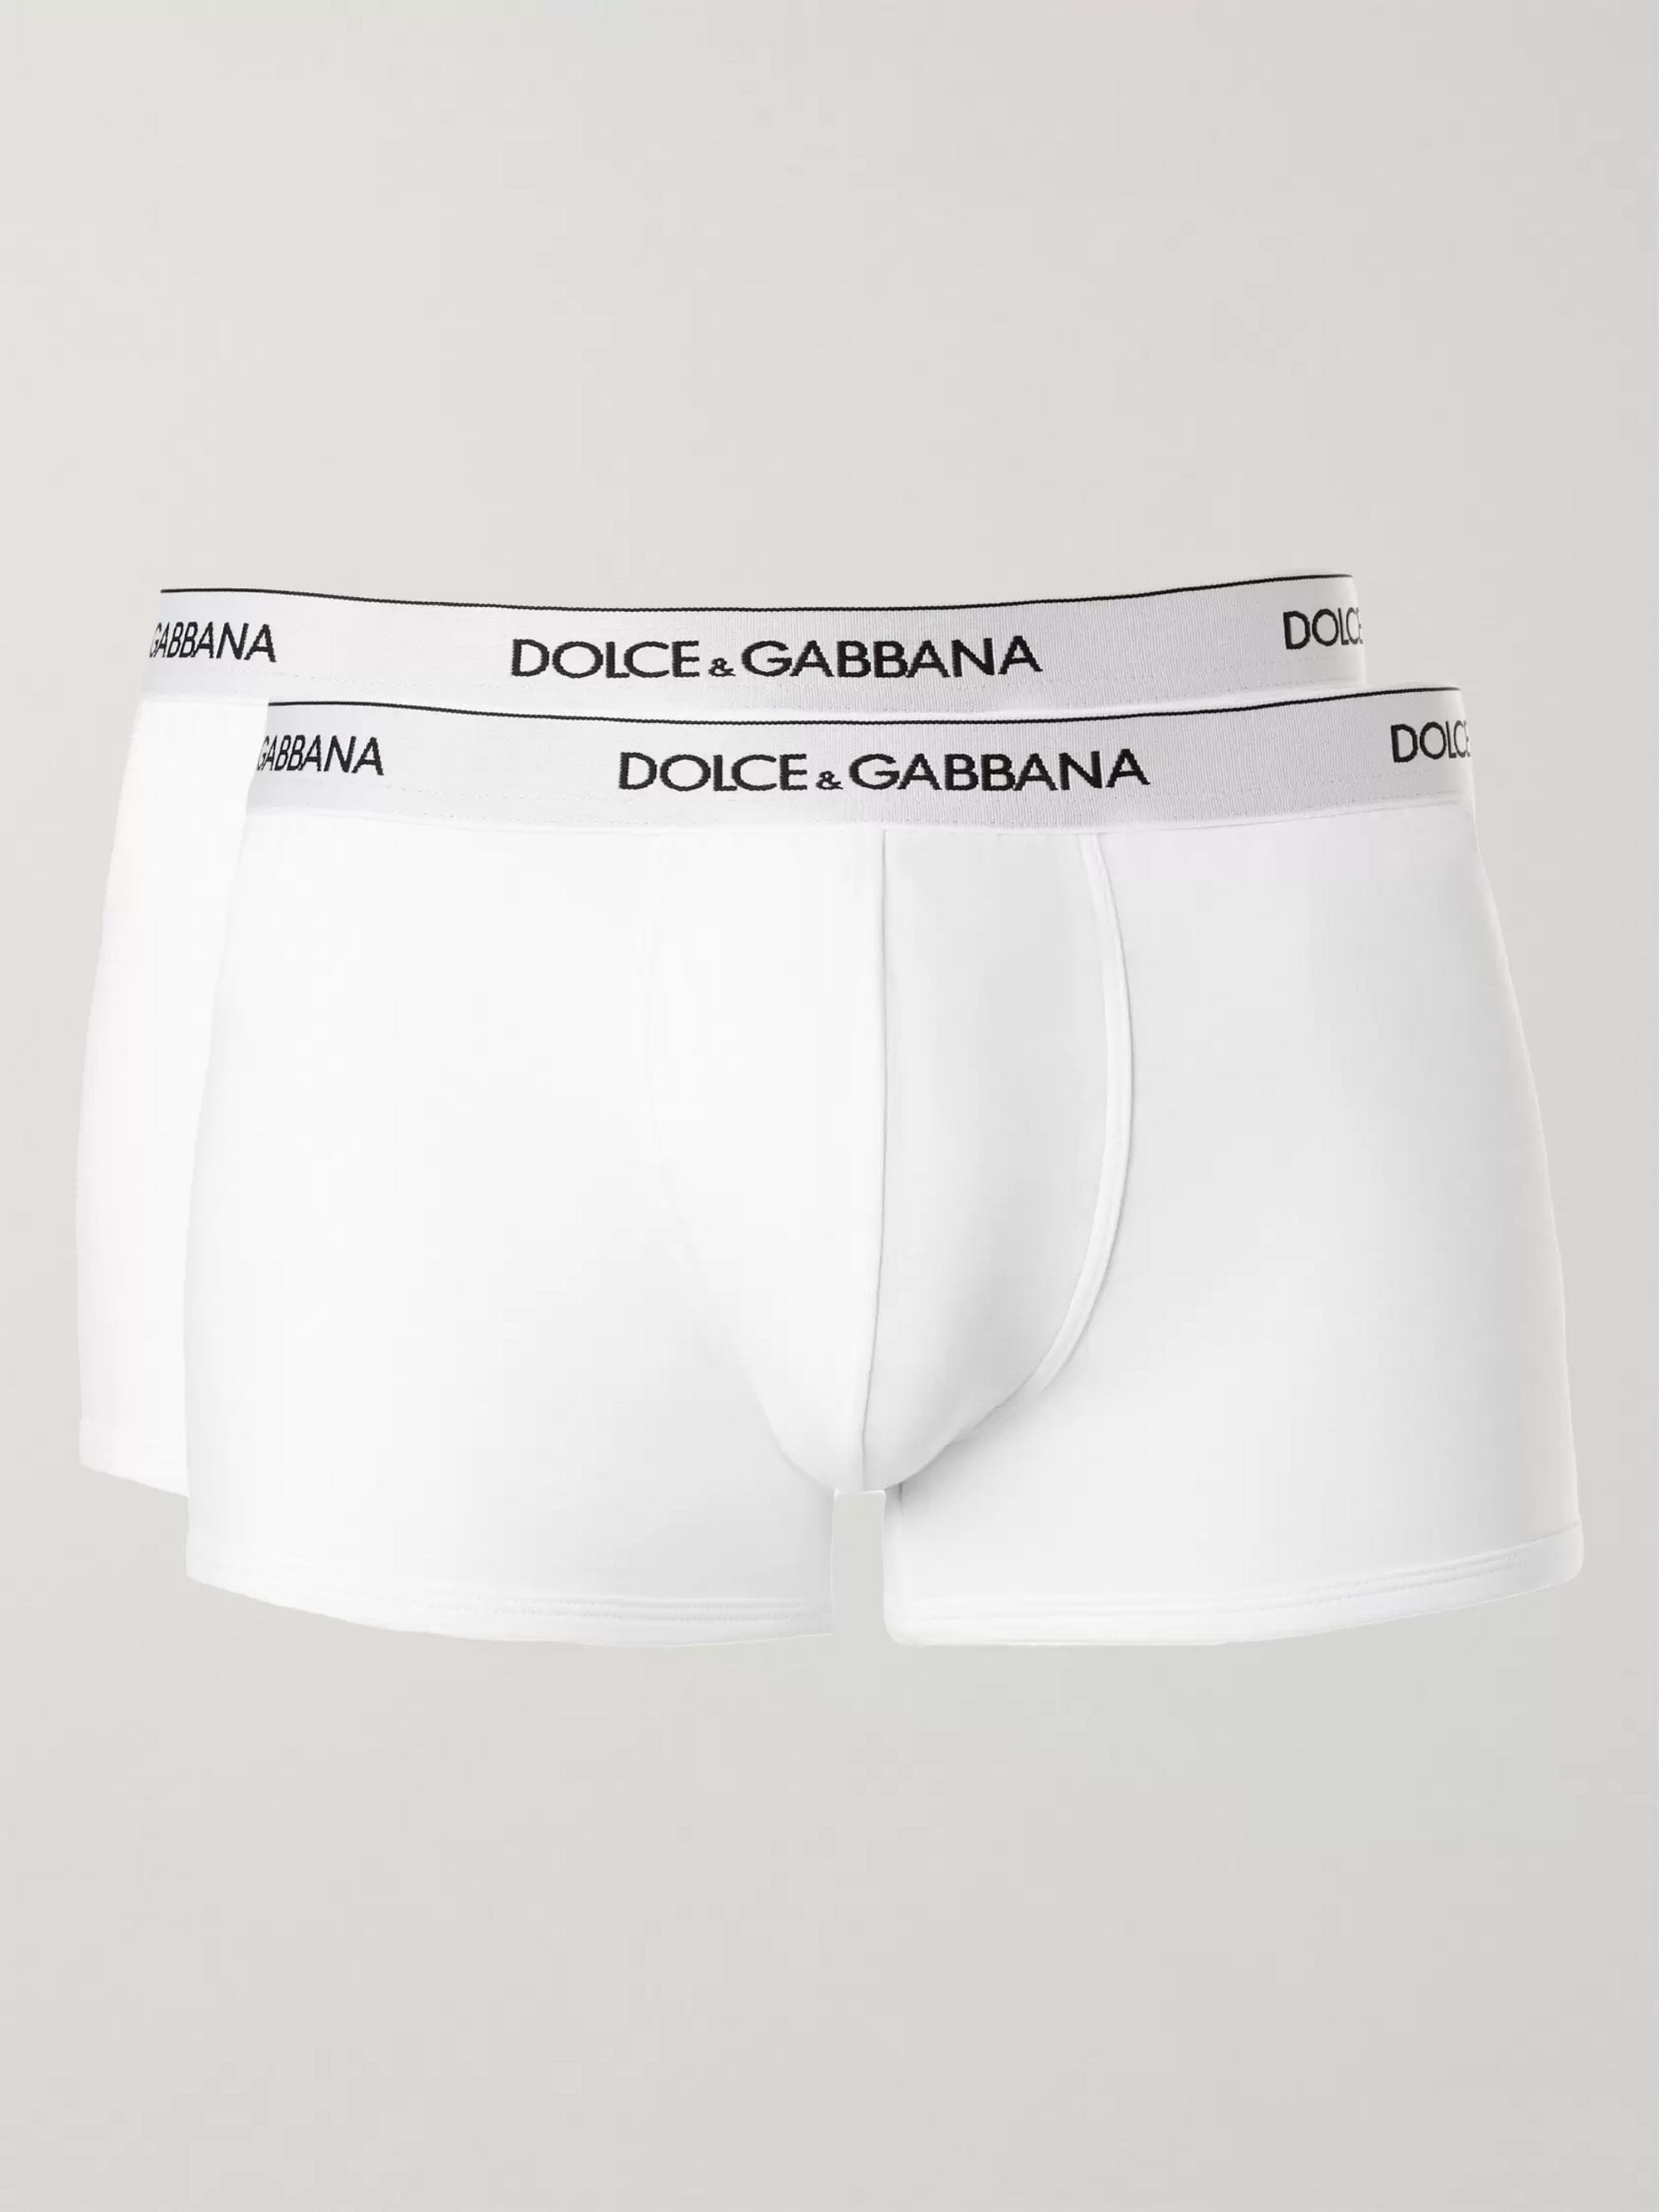 dolce and gabbana boxers